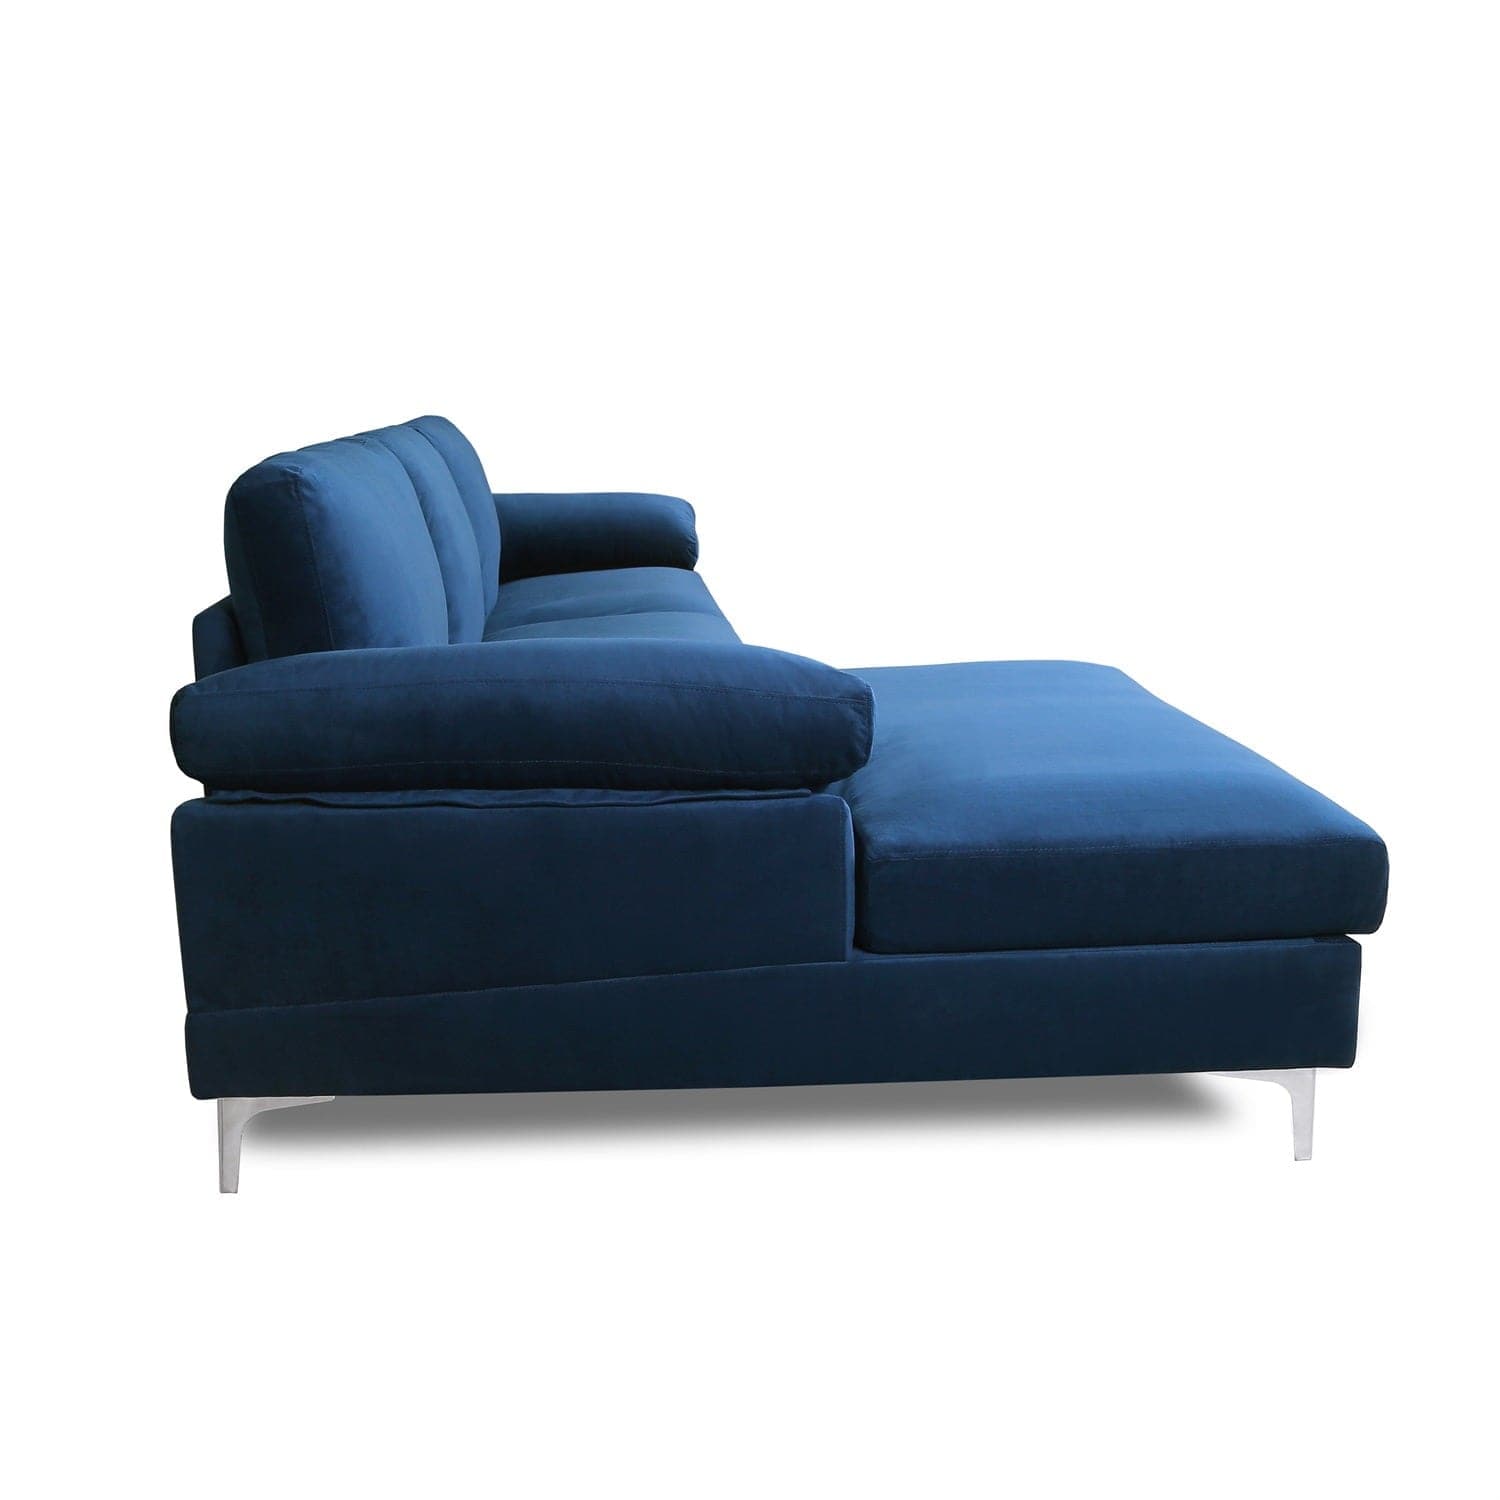 - TFC&H Co. SECTIONAL SOFA VELVET LEFT HAND FACING - NAVY BLUE- Ships from The US - sectional at TFC&H Co.